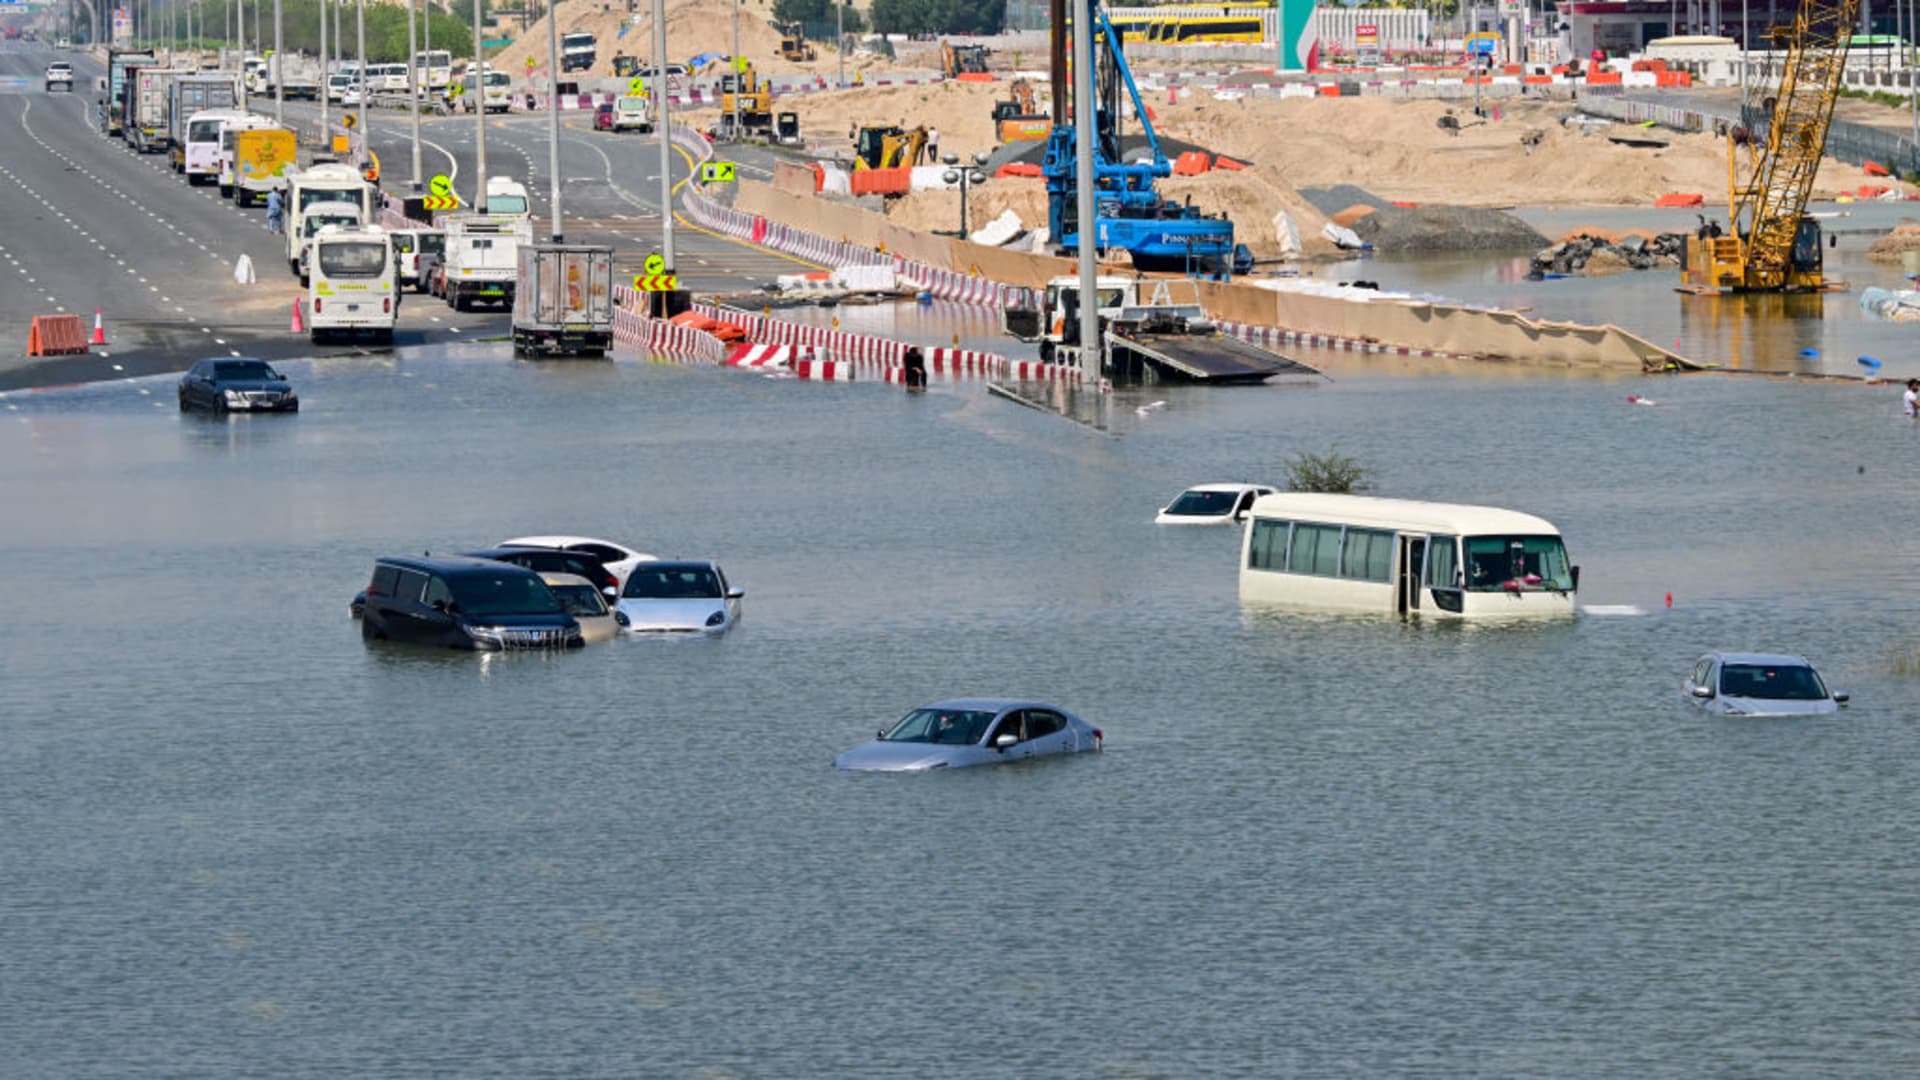 Dubai flooding and a climate change drain test the world is failing [Video]